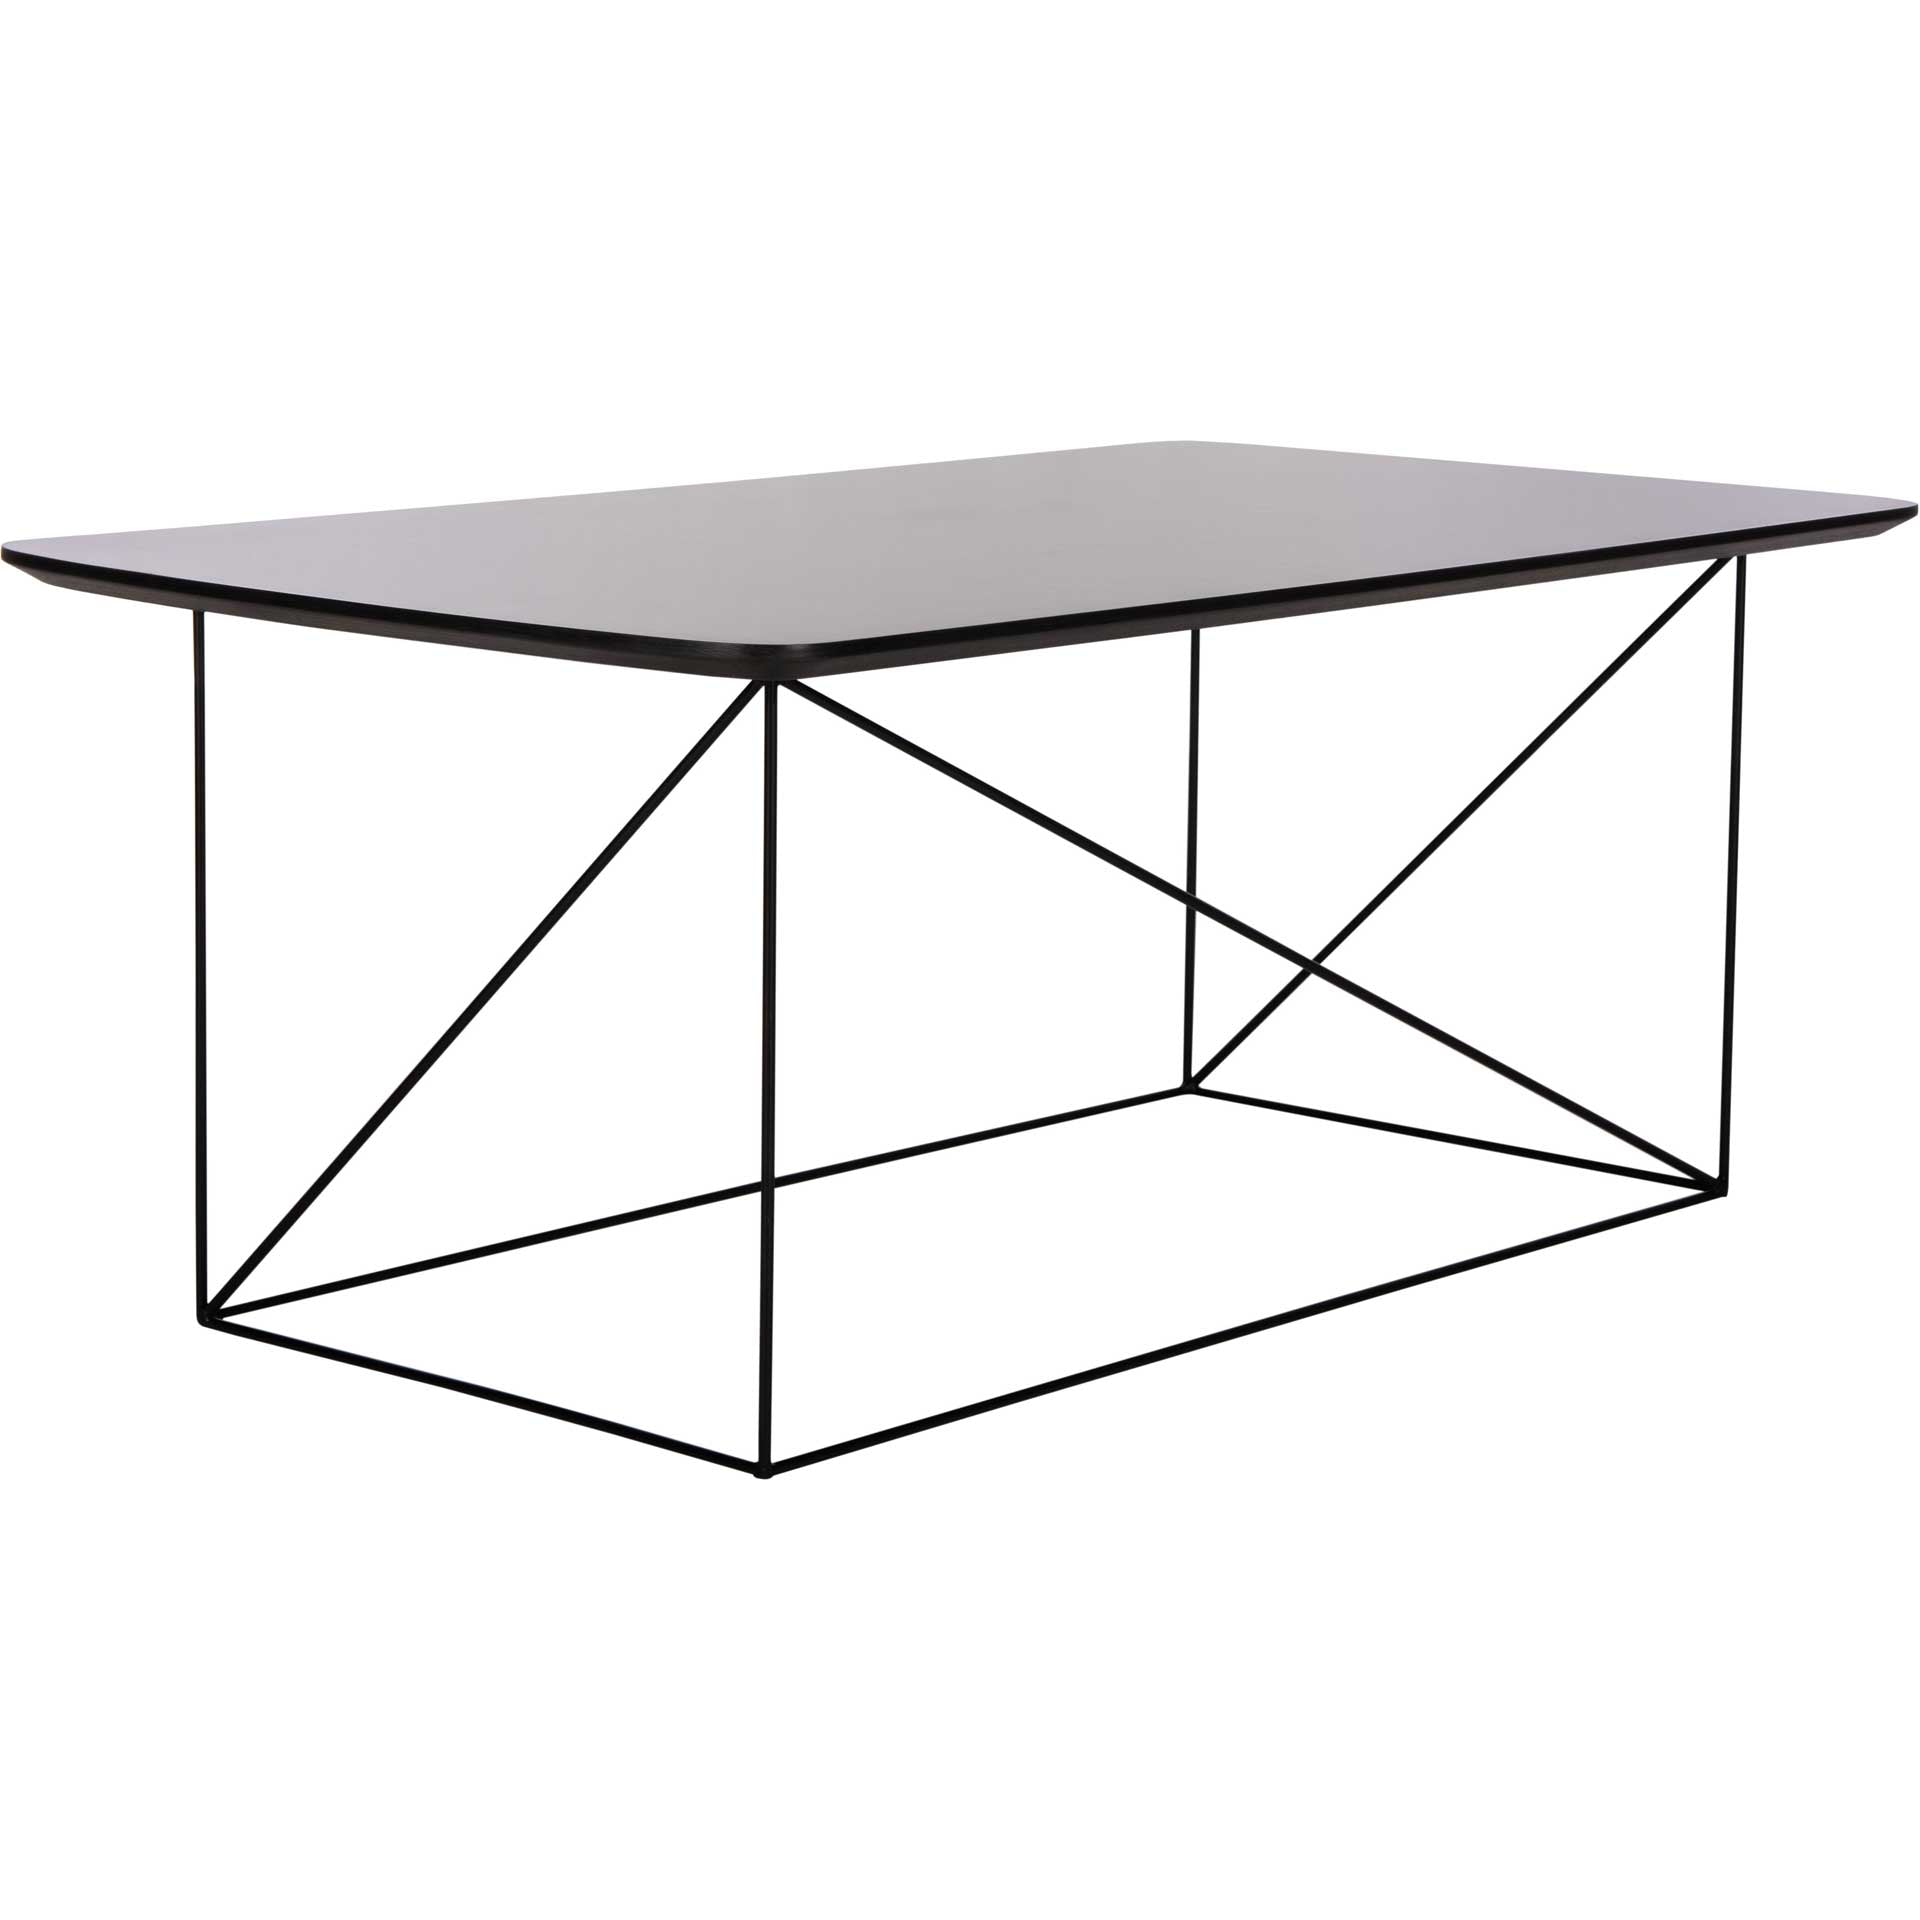 Ryder Coffee Table Gray/Black